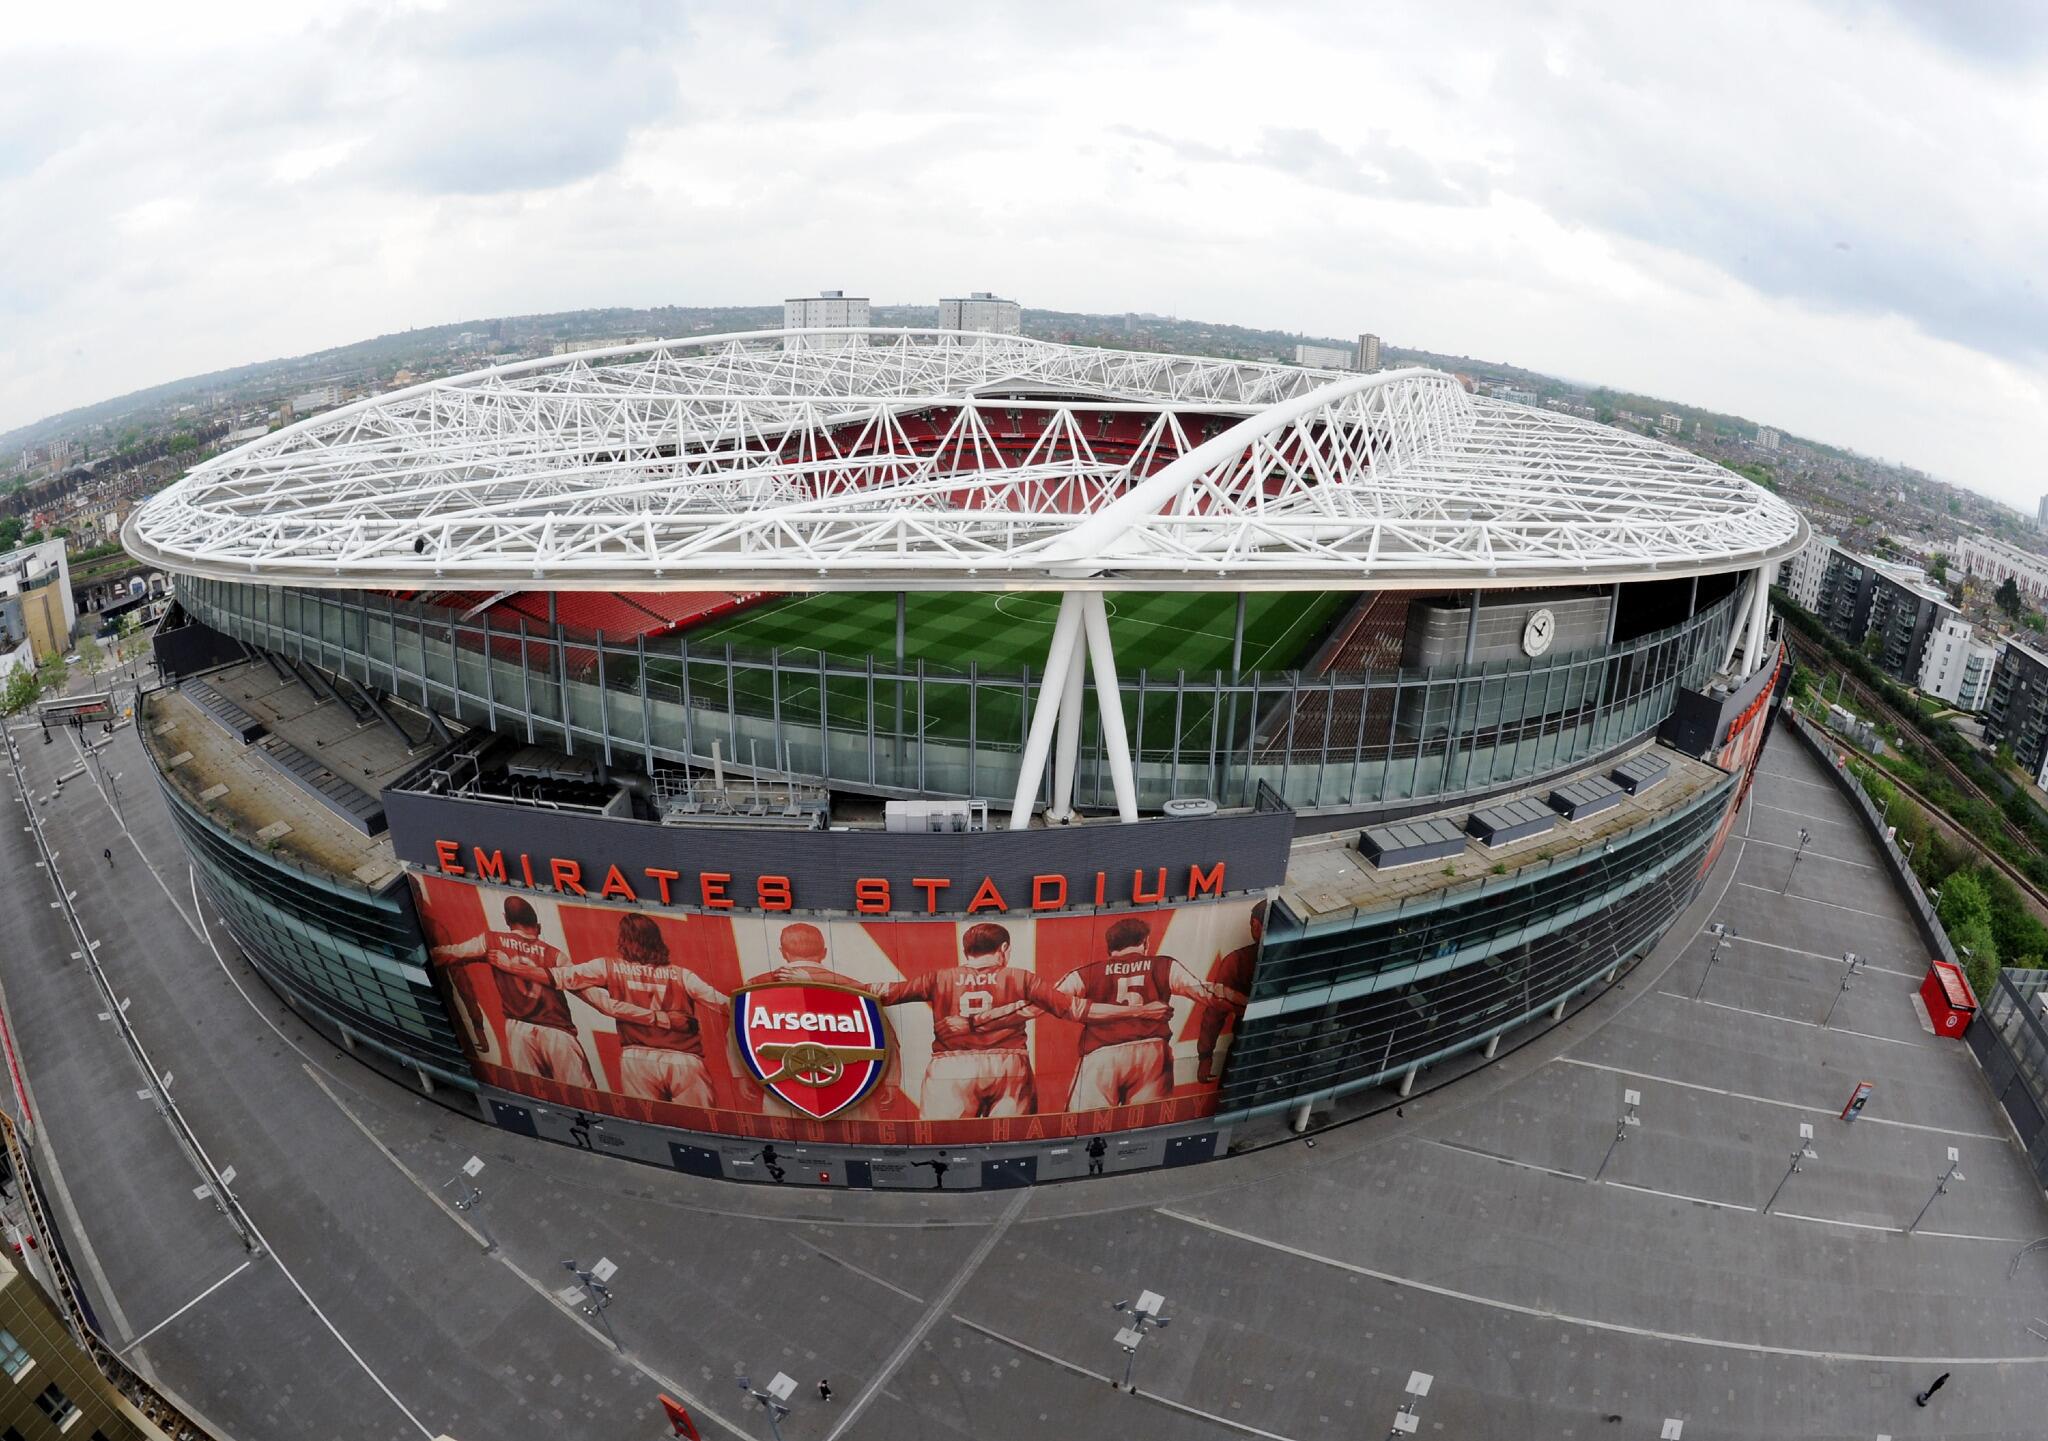 LONDON’S ICONIC EMIRATES: MORE THAN JUST A STADIUM